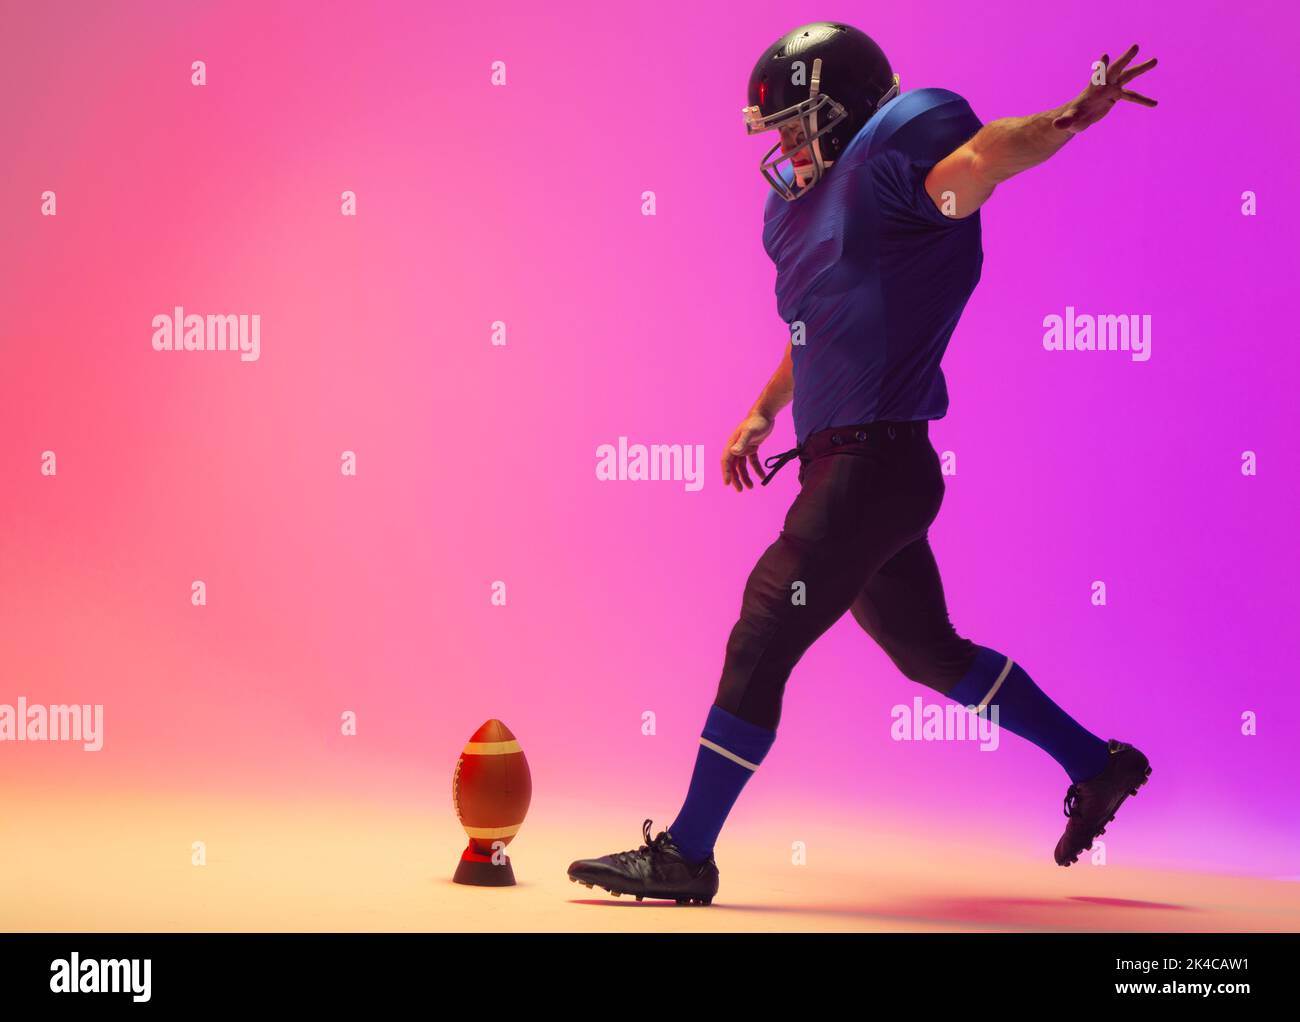 Caucasian male american football player kicking ball with neon pink lighting. Sport, movement, training and active lifestyle concept. Stock Photo